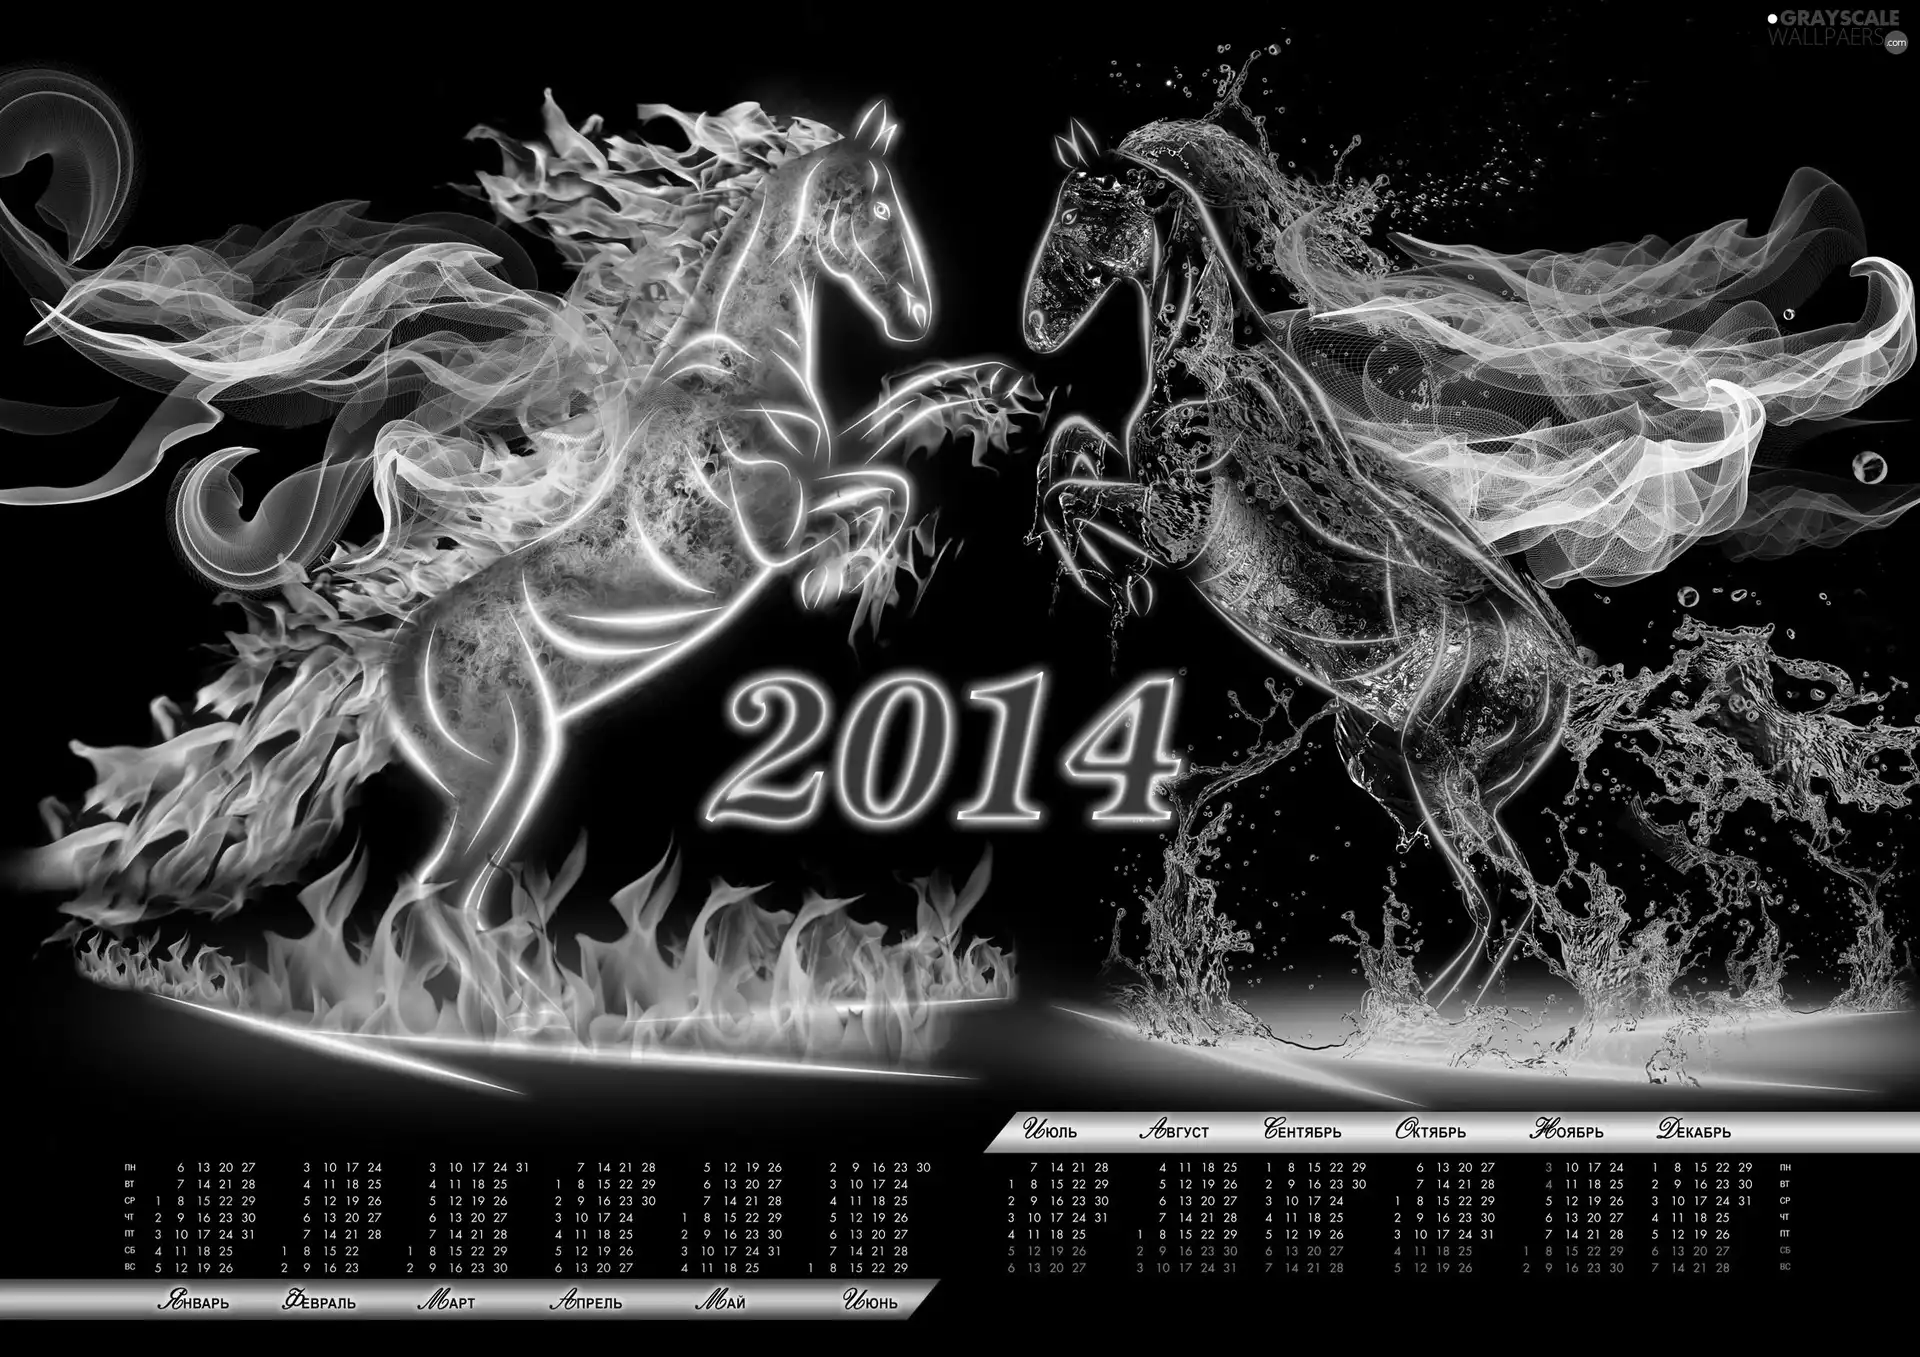 Calendar, Year of the Horse, New Year